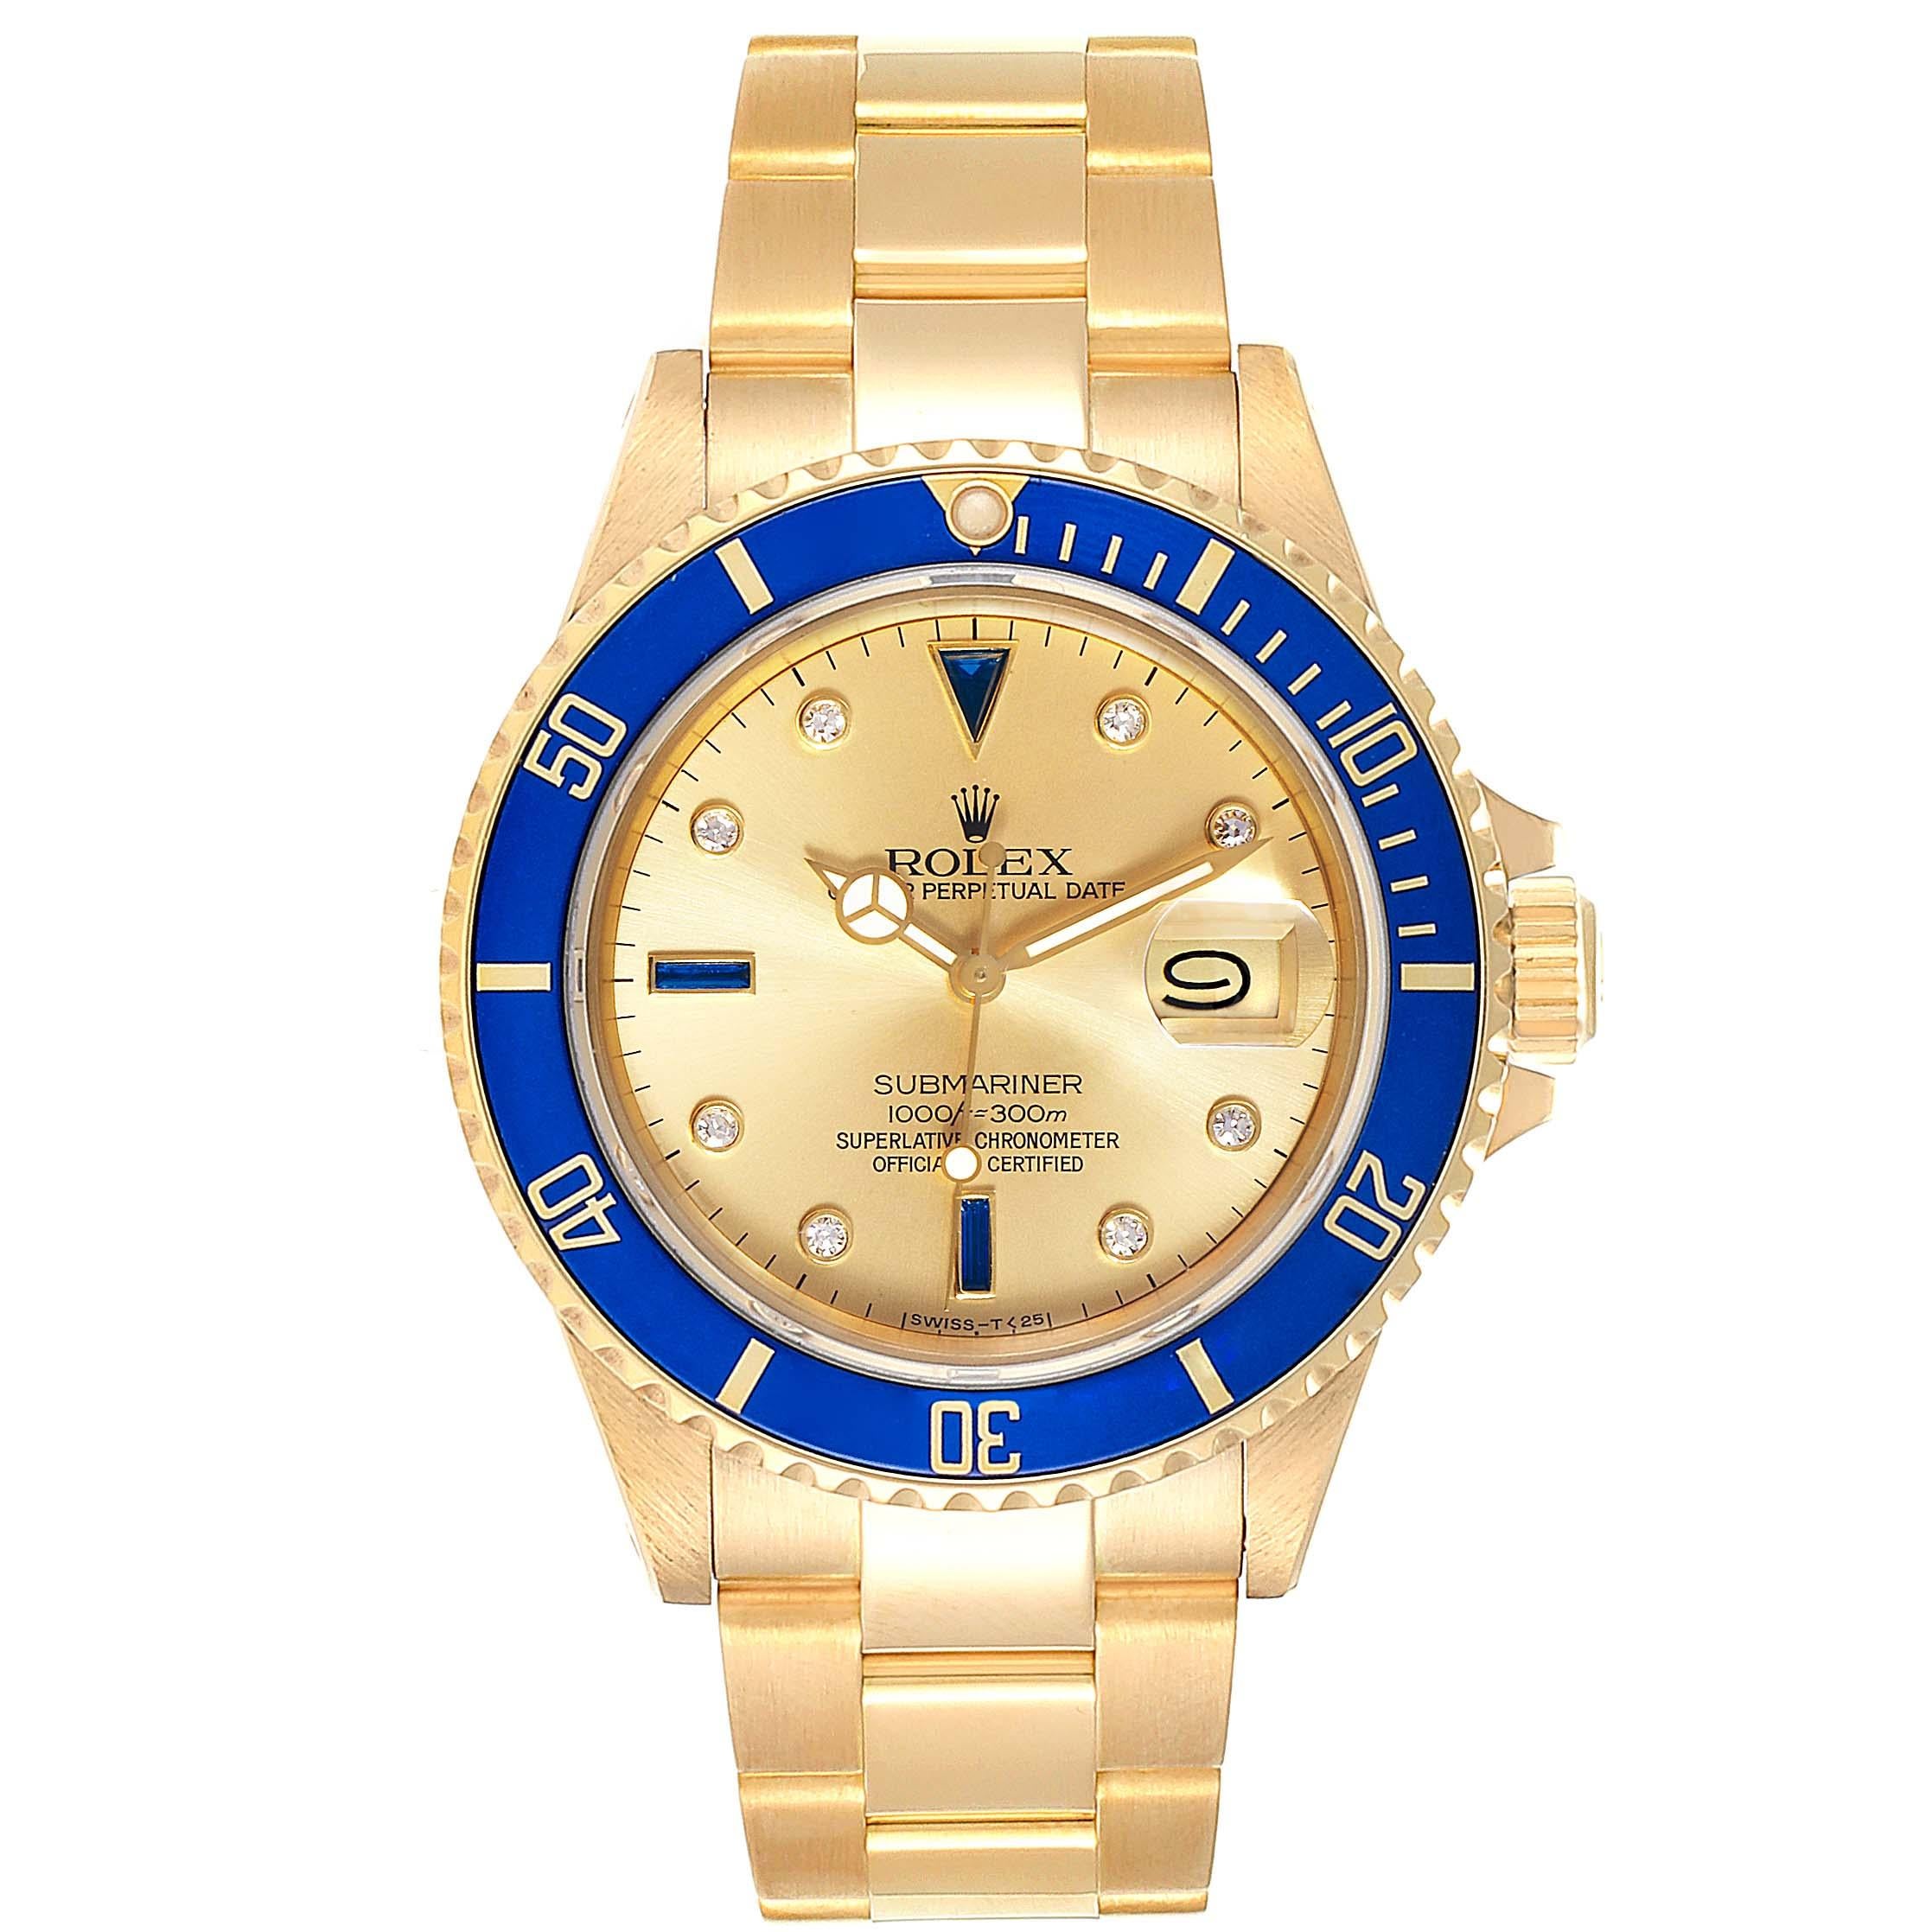 Rolex Submariner Yellow Gold Diamond Sapphire Serti Dial Watch 16808. Officially certified chronometer self-winding movement. 18k yellow gold case 40.0 mm in diameter. Rolex logo on a crown. Blue insert special time-lapse unidirectional rotating